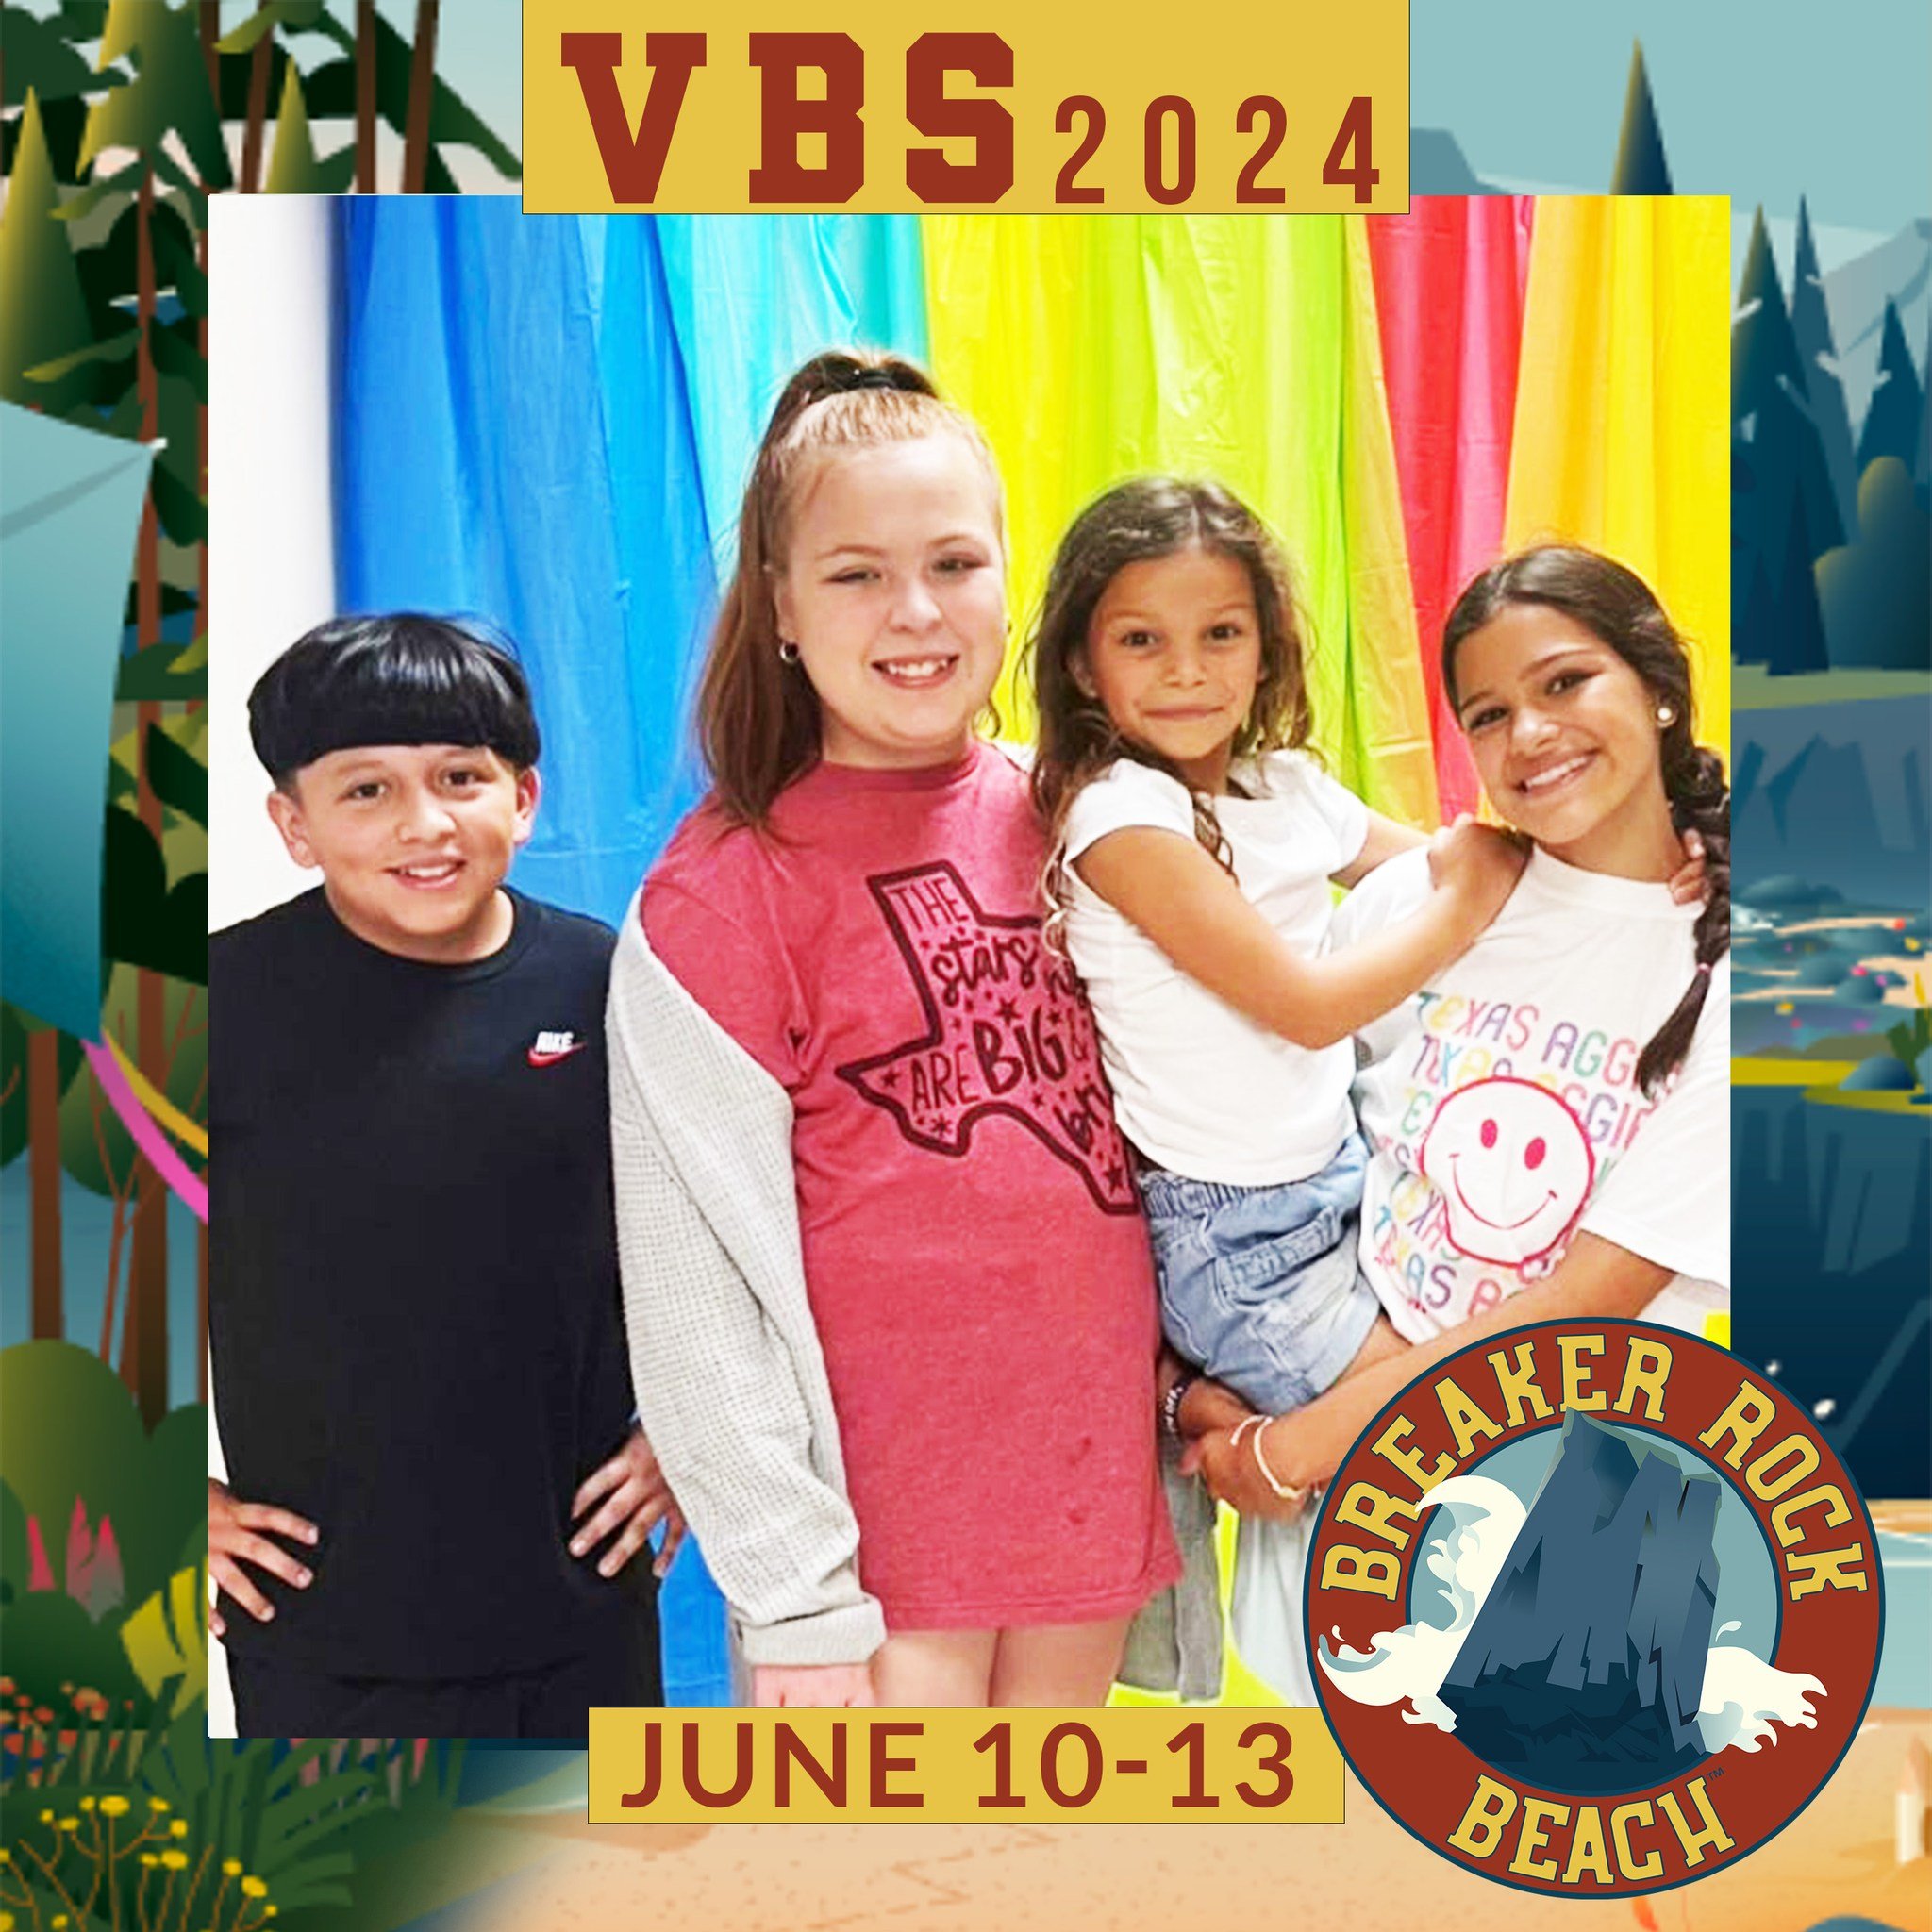 Completed K-6th Grade
Register today! fbcconroe.org/vbs